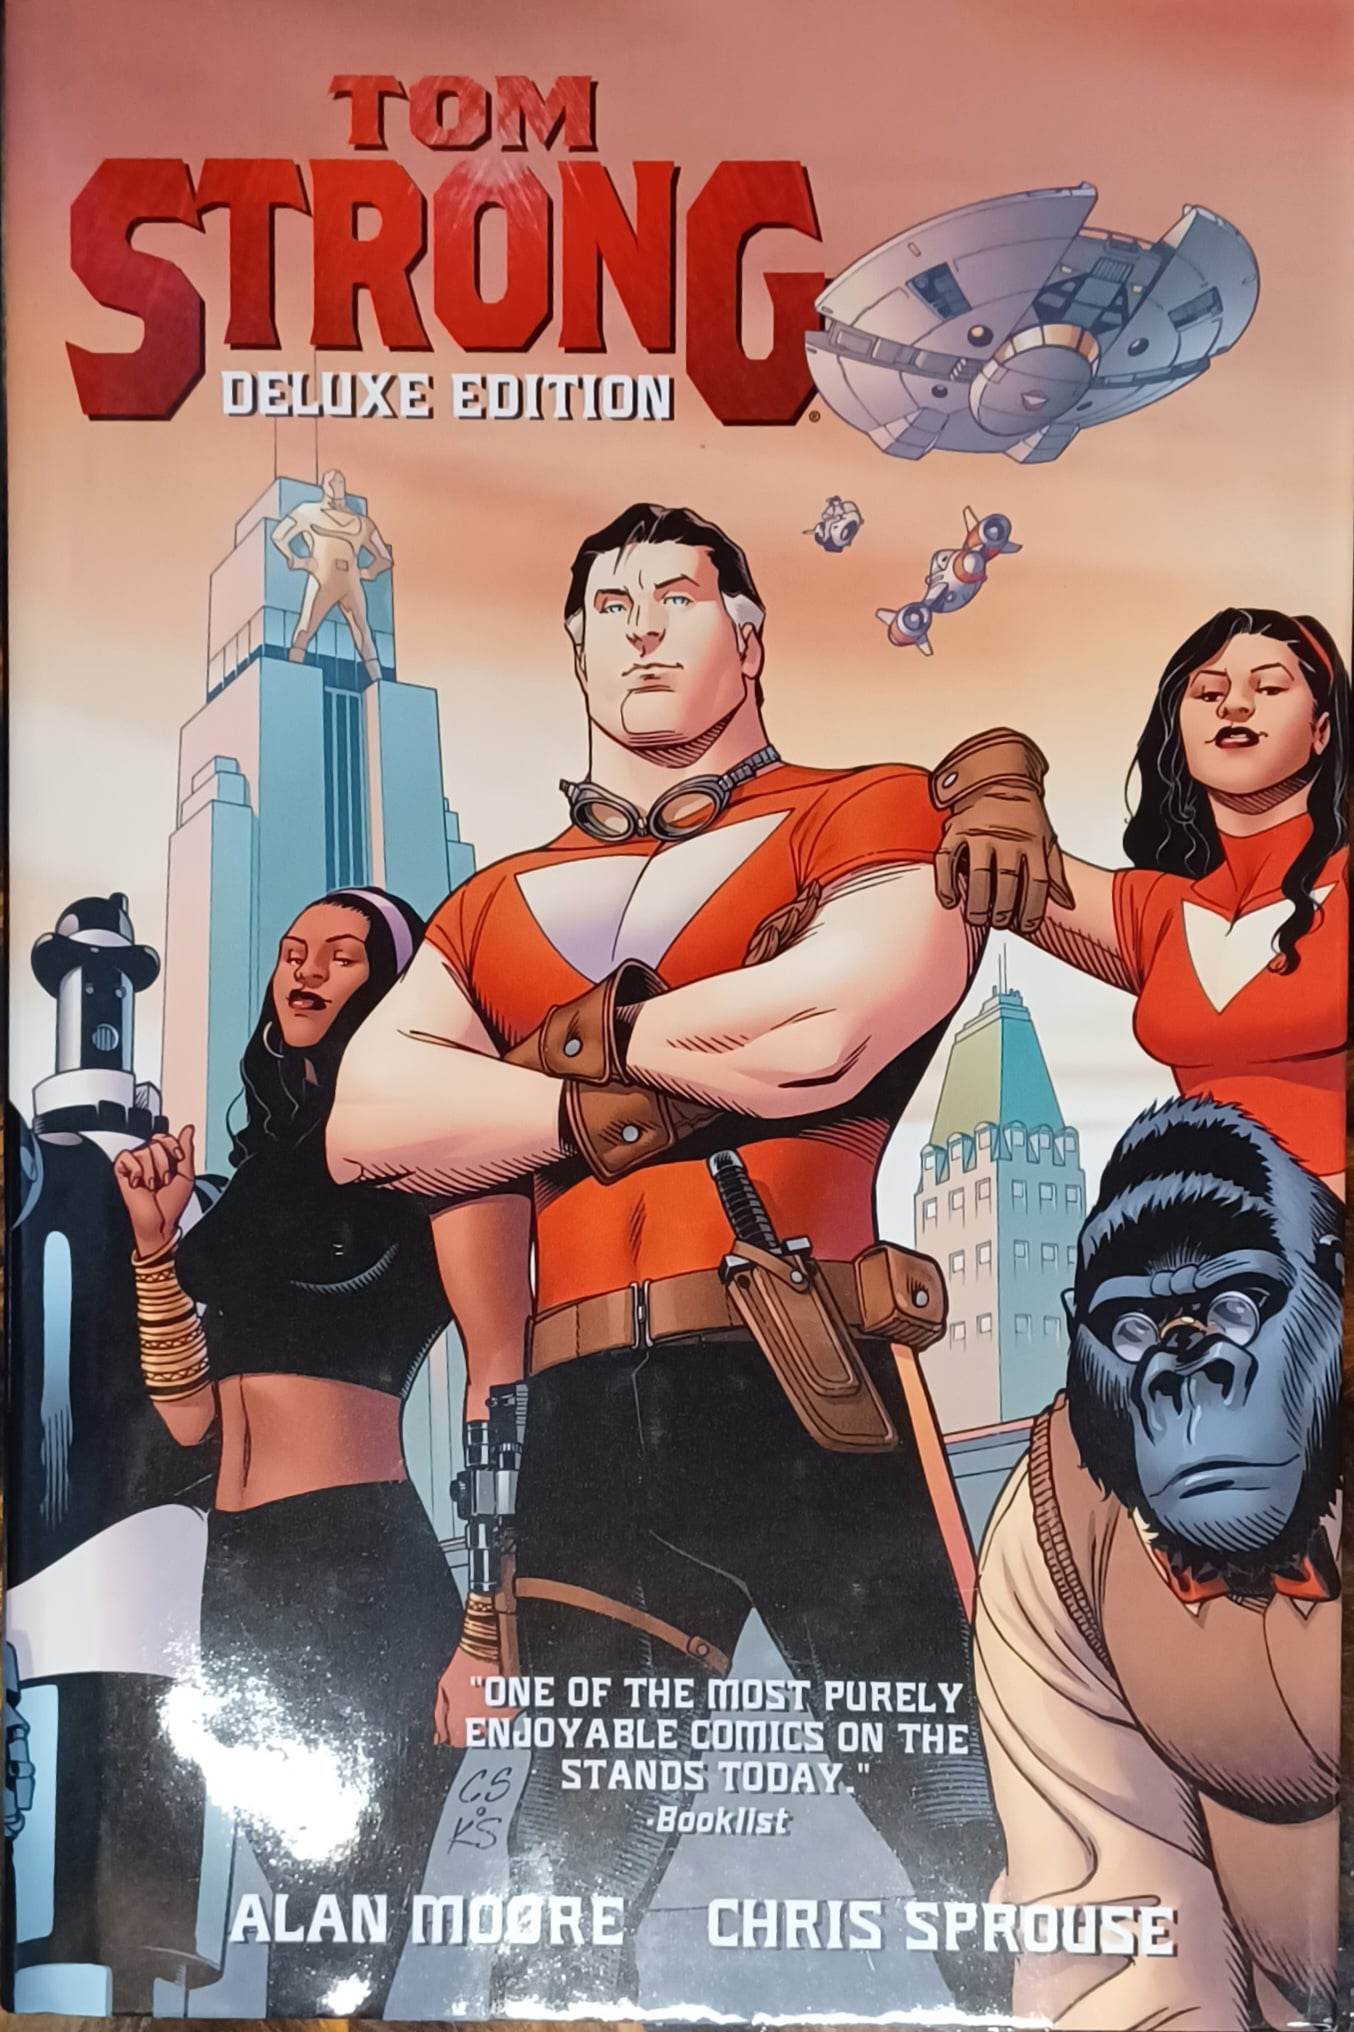 Tom Strong Deluxe Edition Hardcover Book 1